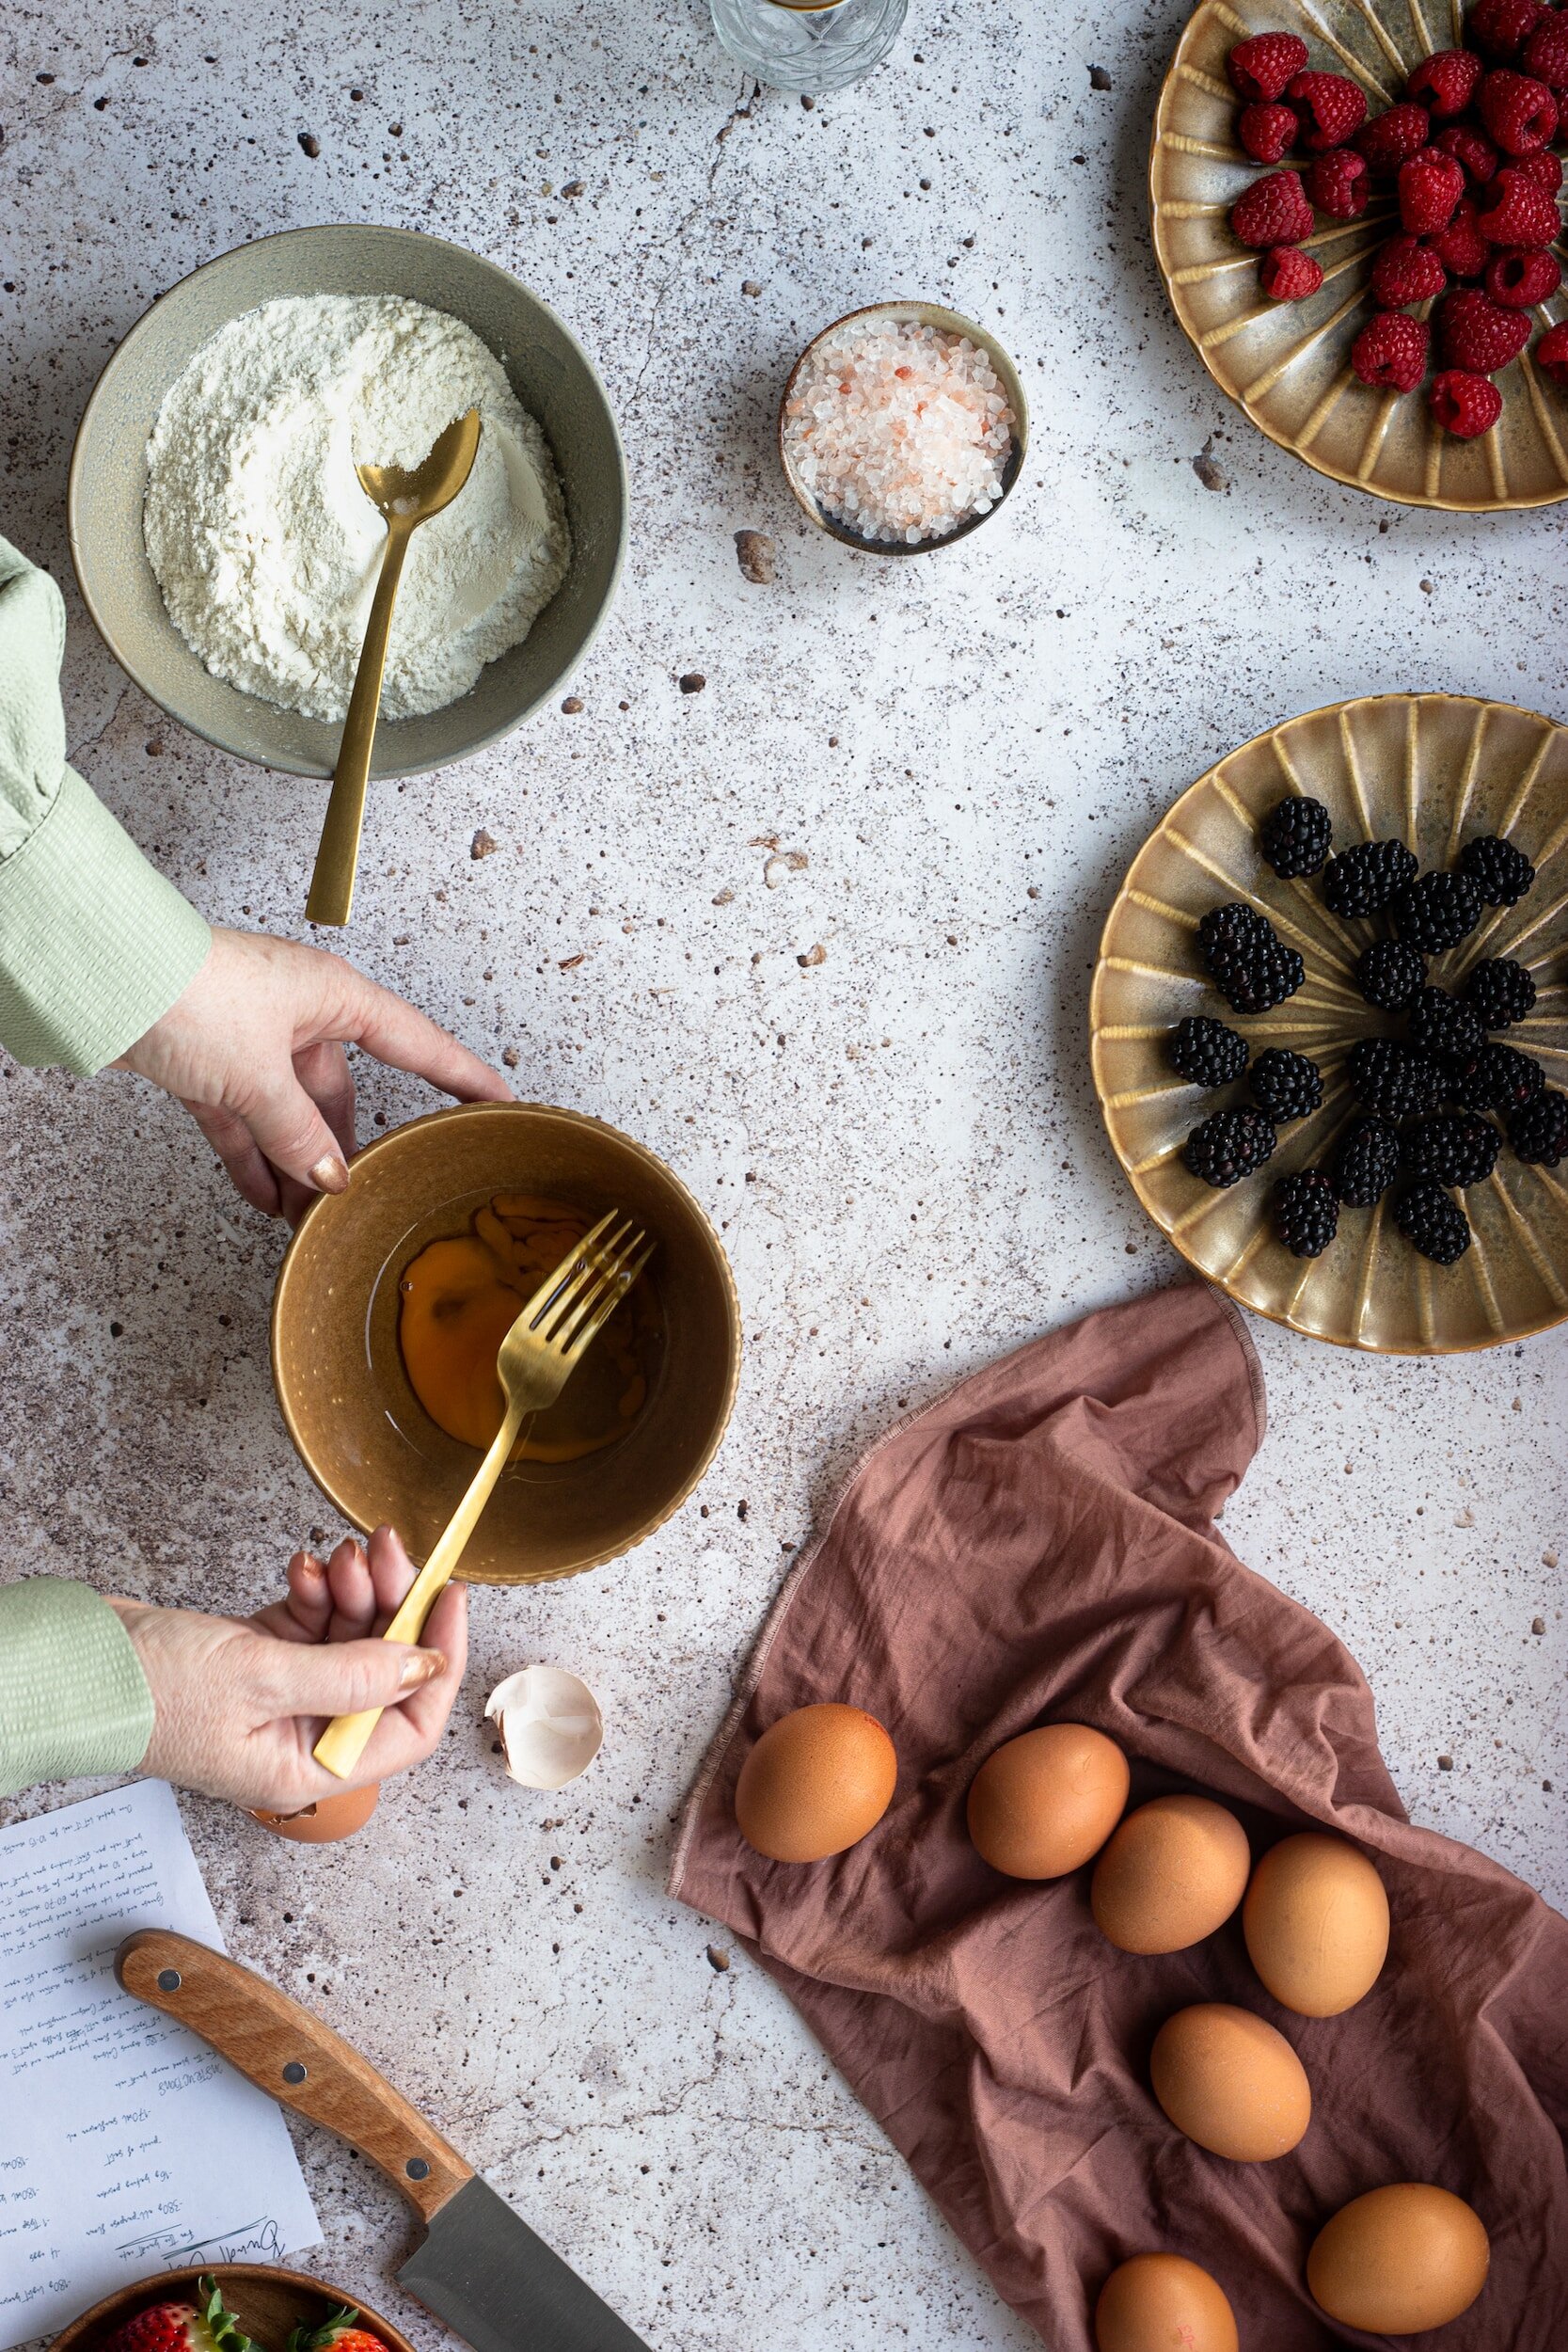 Online workshops for every cooking and baking enthusiast